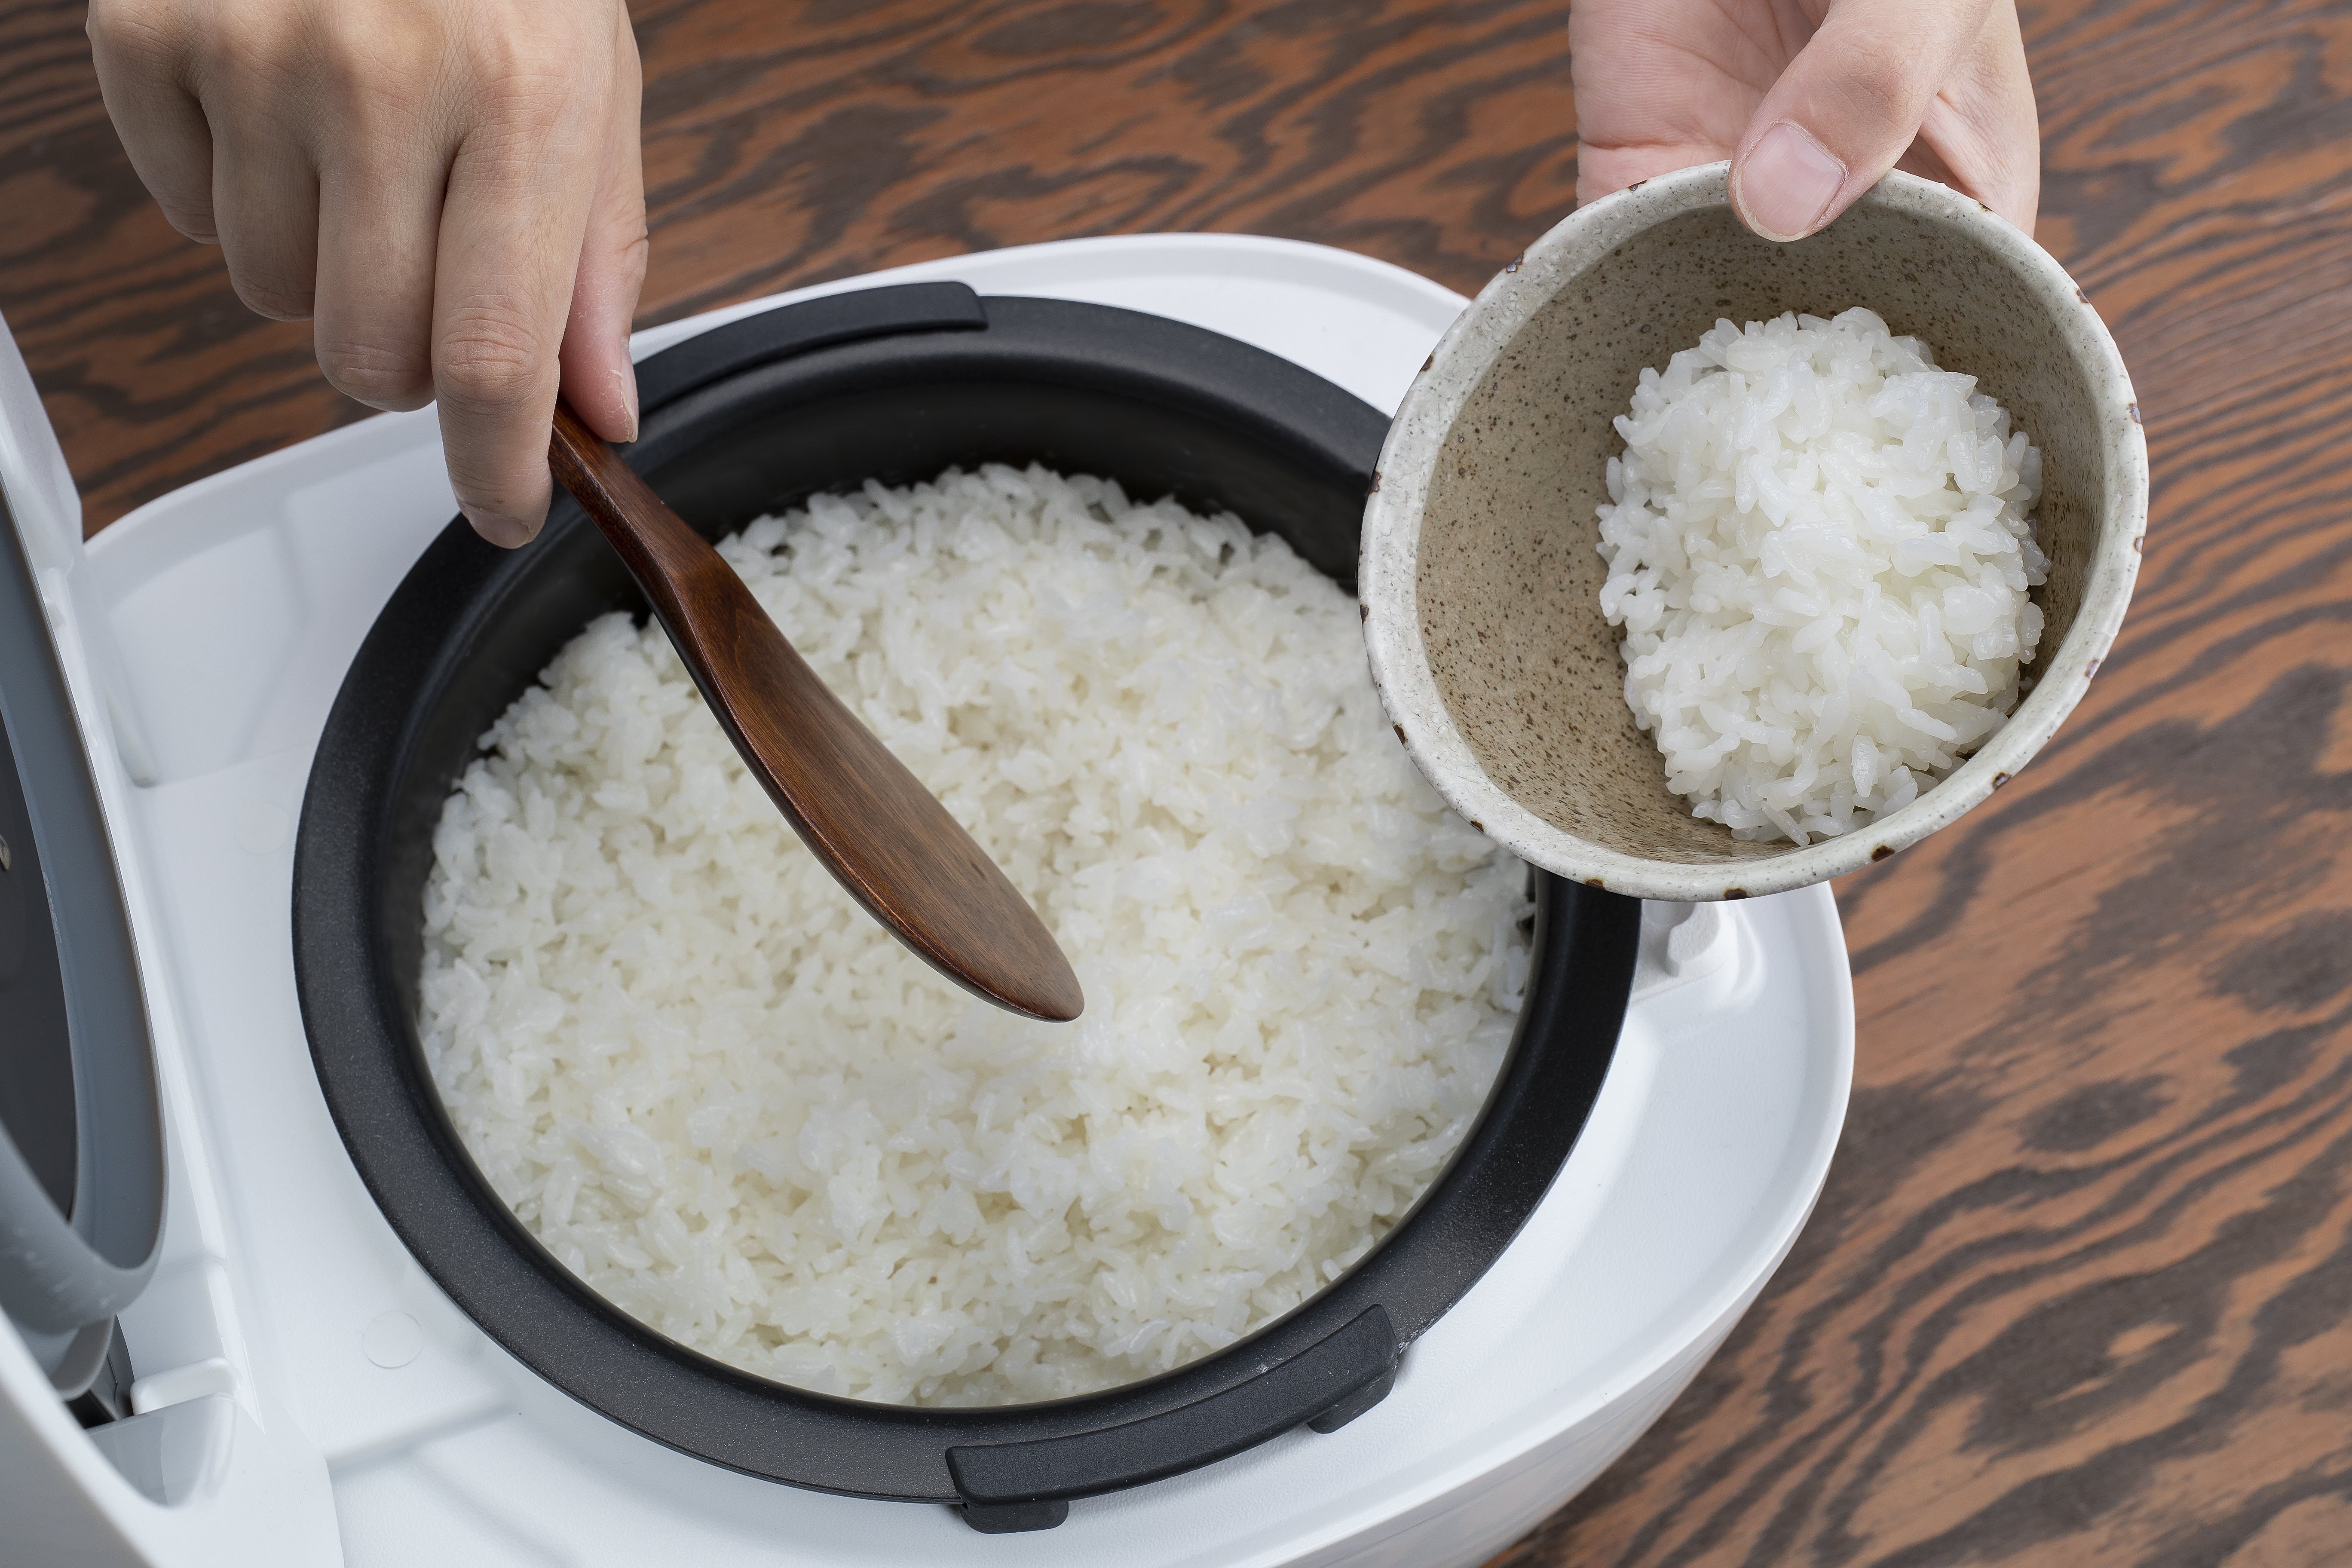 made-in-japan-double-pressure-induction-heating-rice-cooker-jpt-h-express-limited-cups.jpg (13.98 MB)